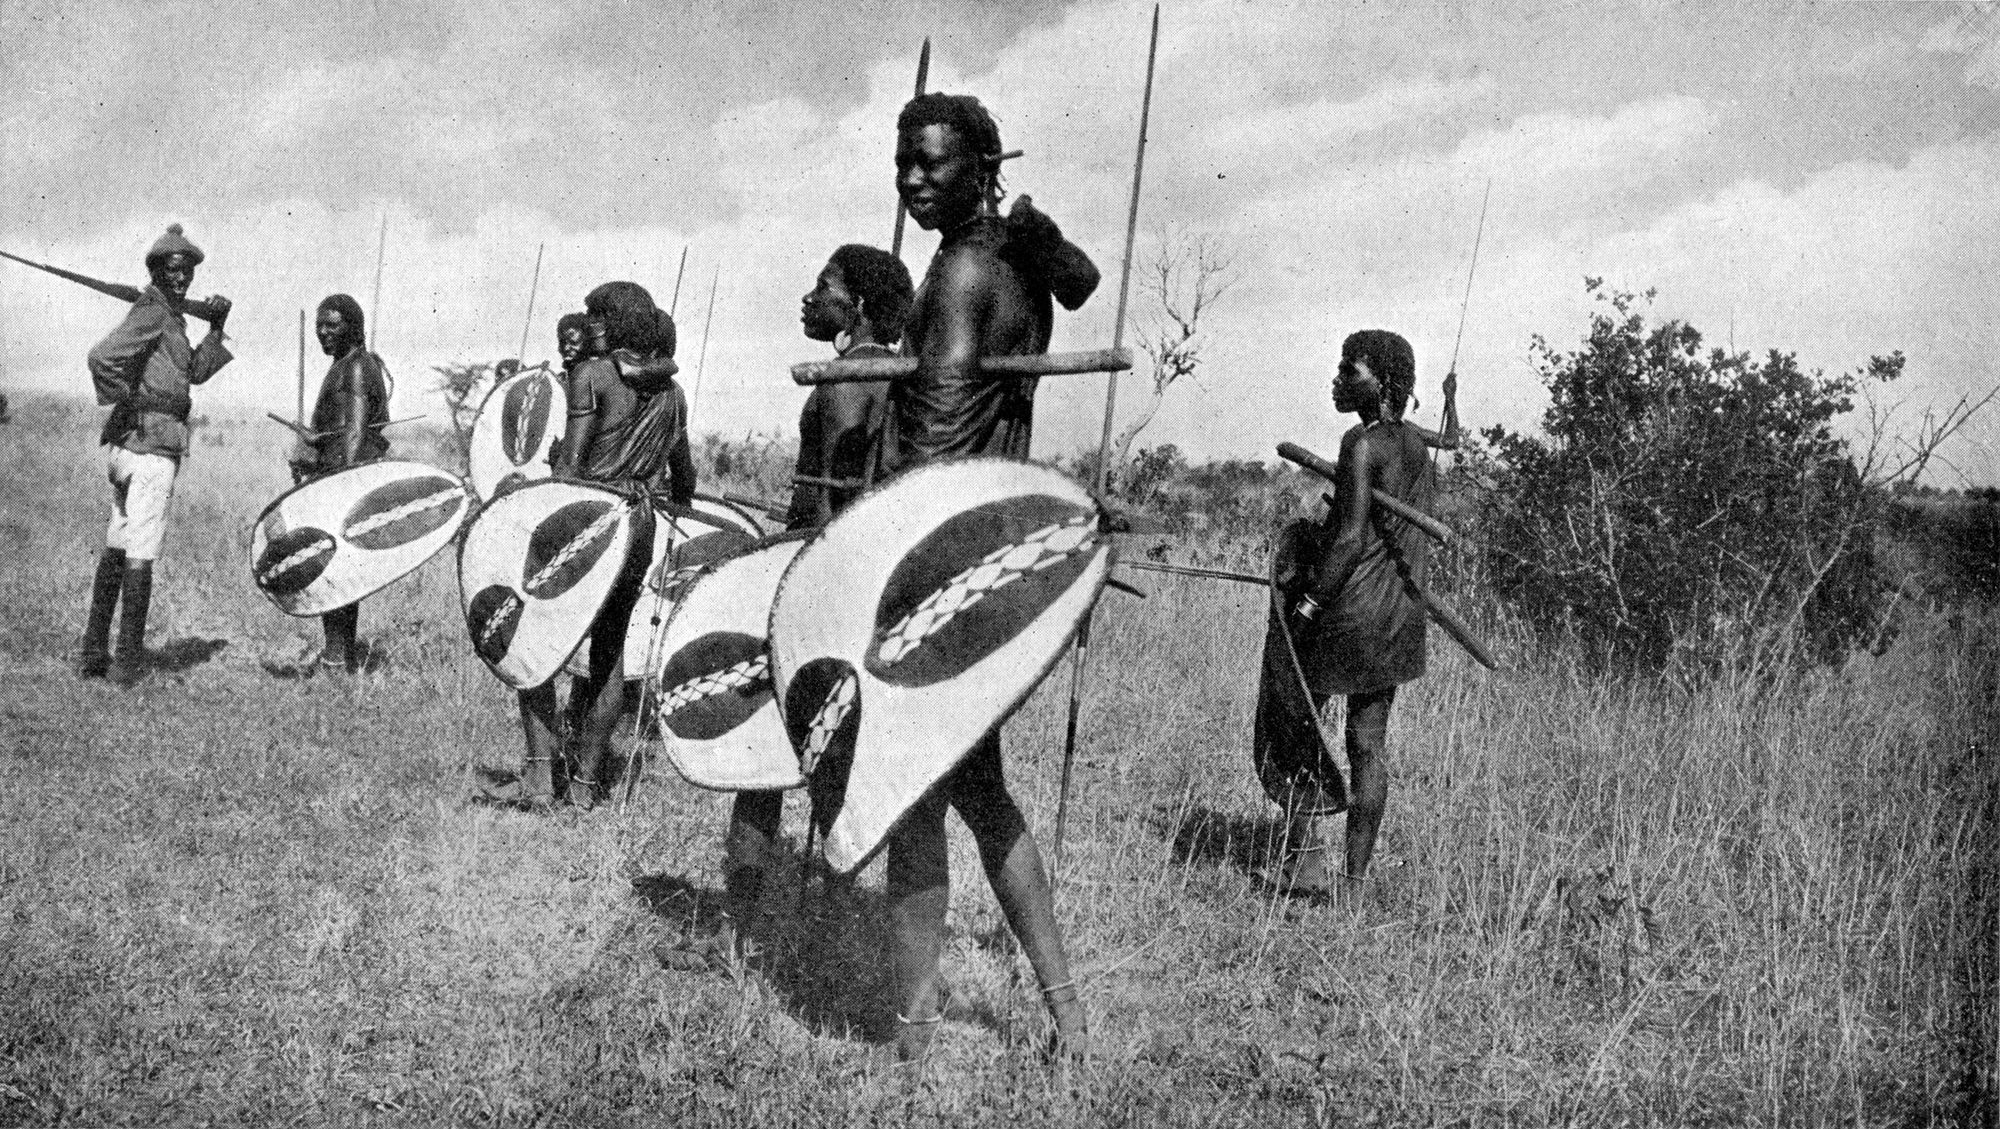 Did African warriors such as the Zulus practice any sort of